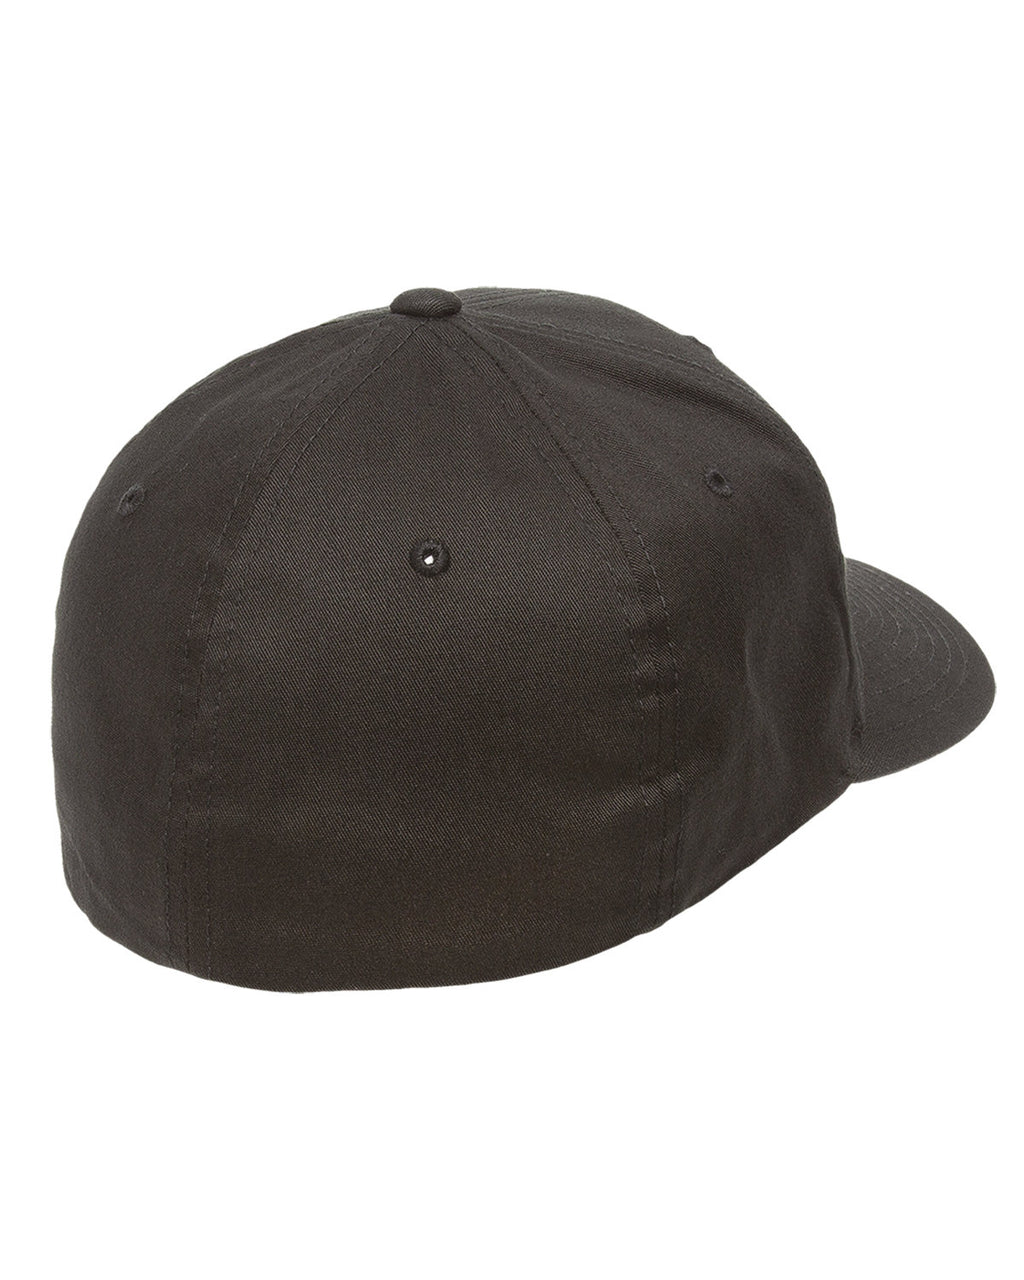 Cotton Twill Accessories and Cap Hats Yupoong Corporate V-Flexfit